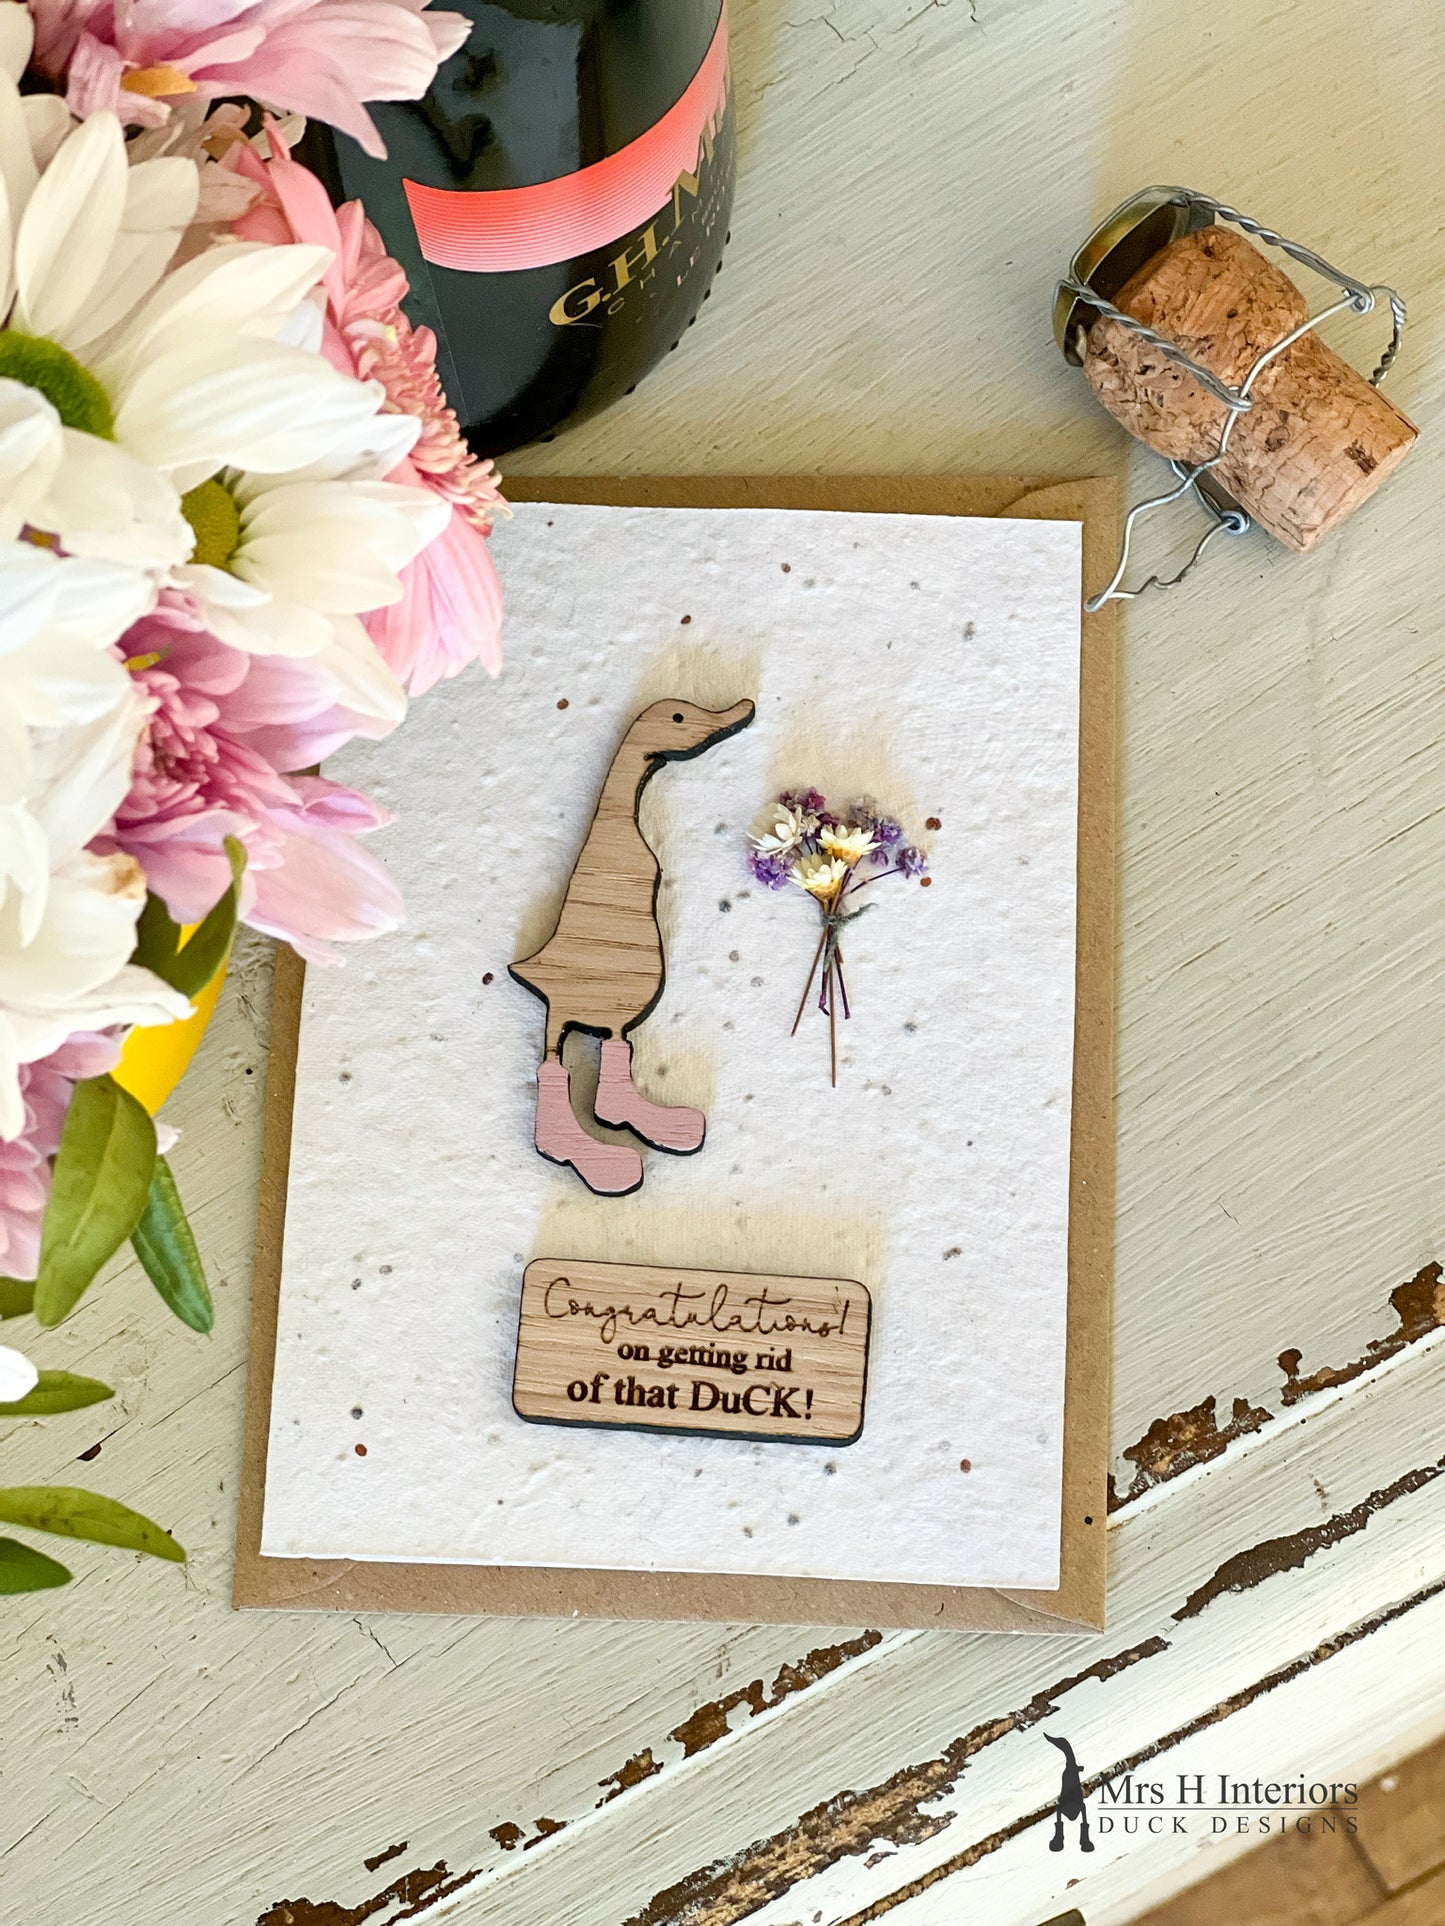 Congratulations on Getting Rid of That Duck Card - Duck with Flowers - Decorated Wooden Duck in Boots by Mrs H the Duck Lady